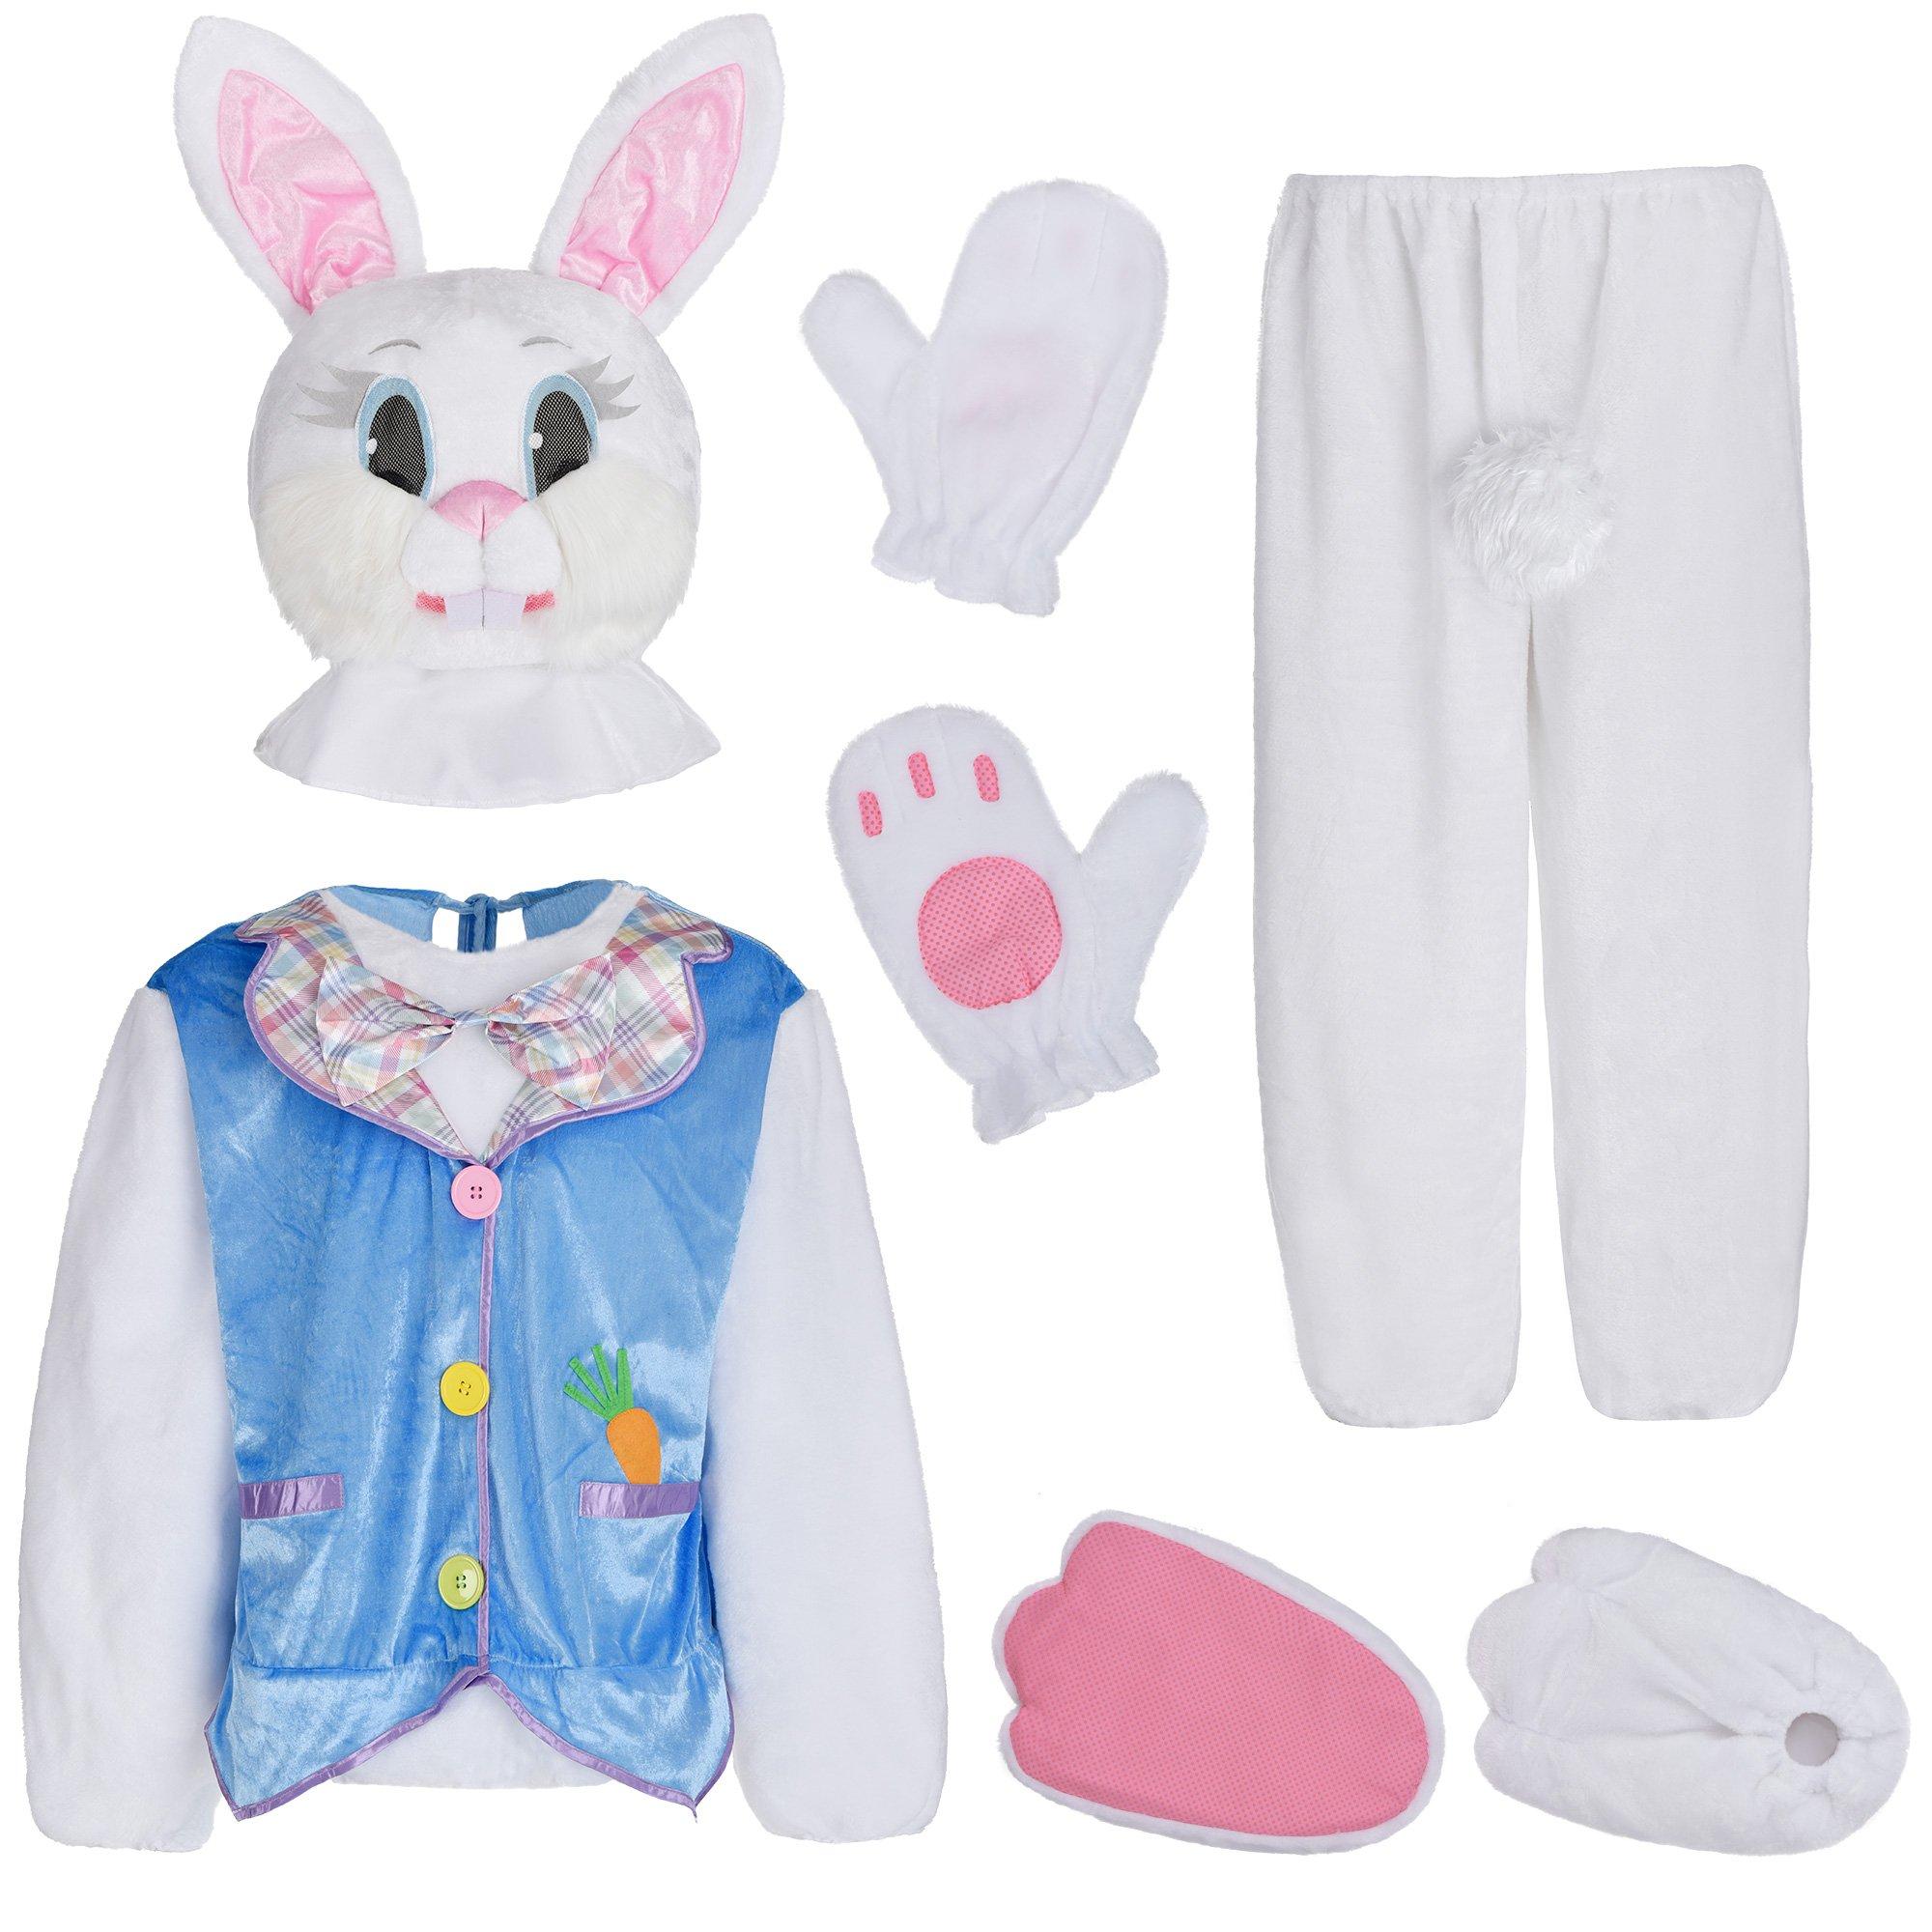 Adult Deluxe Easter Bunny Costume